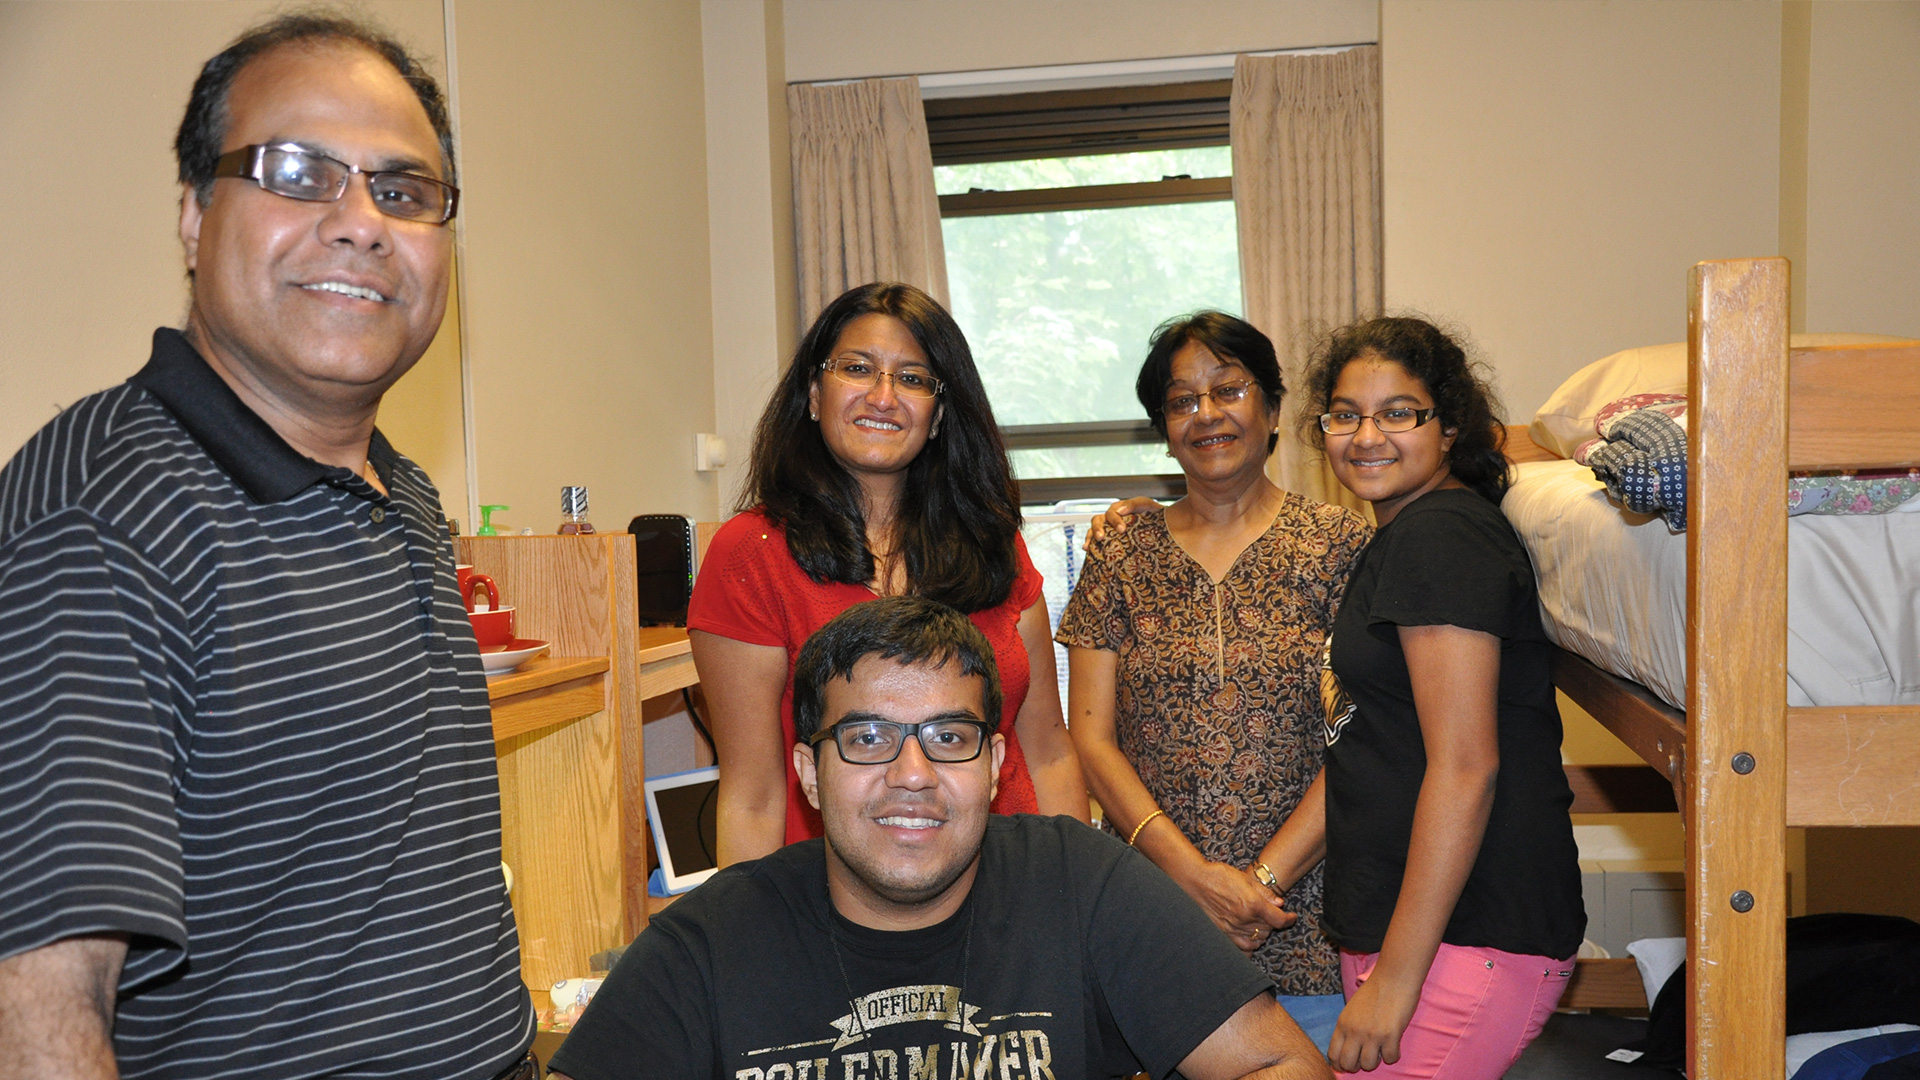 A Purdue family posing for a photo in their student's dorm room on move-in day.